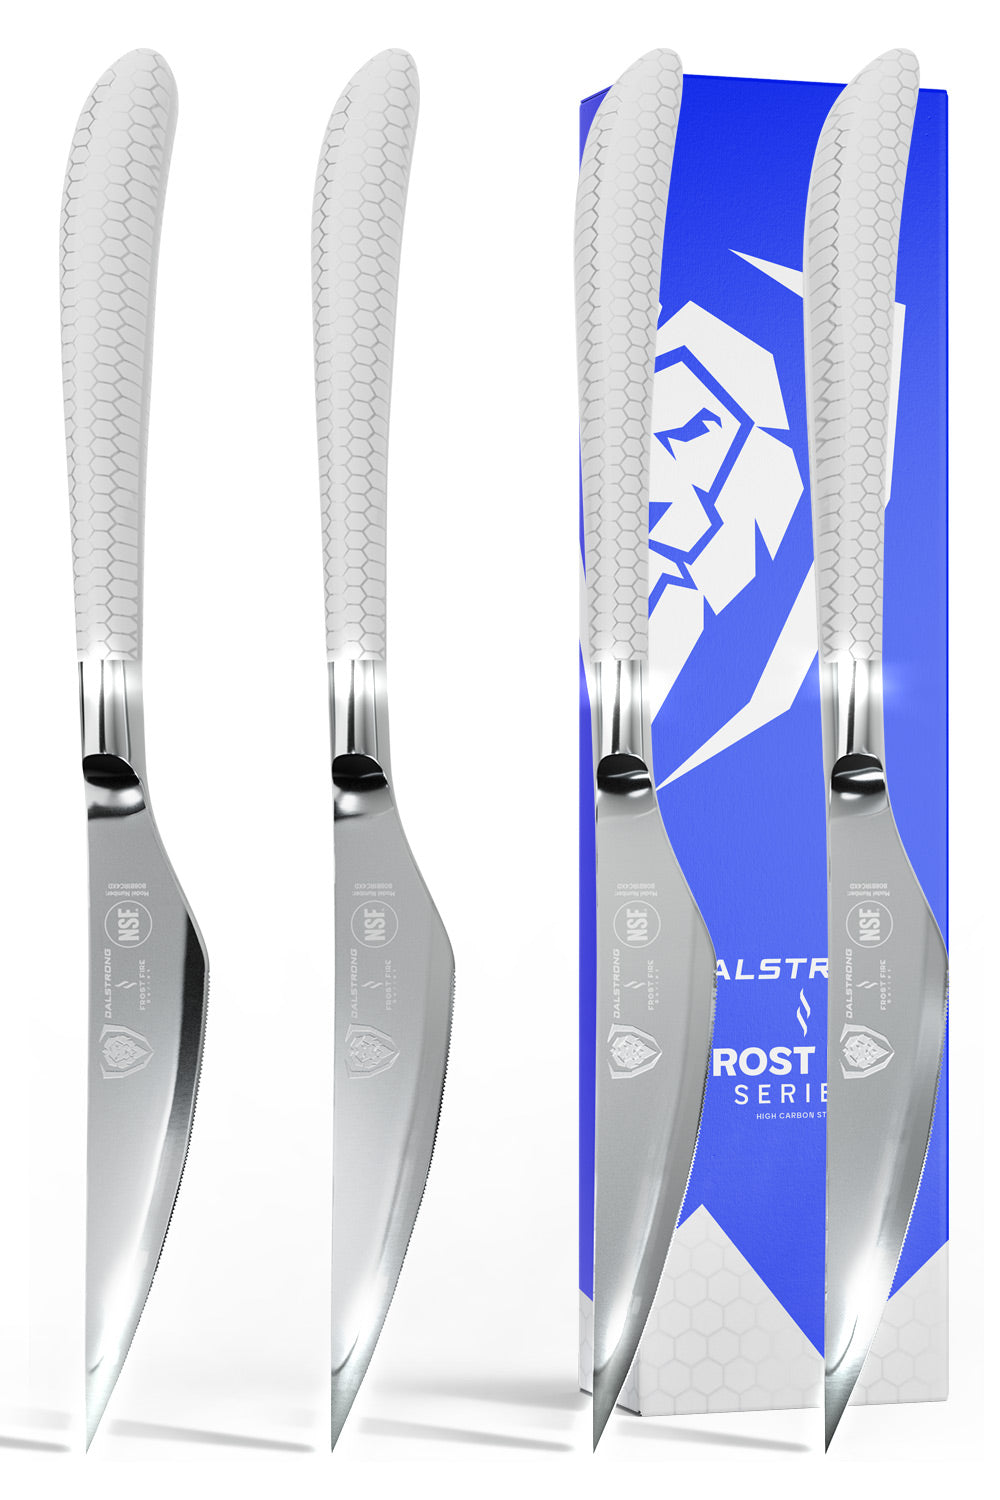 Dalstrong frost fire series steak knife set with white honeycomb handle in front ofi it's premium packaging.